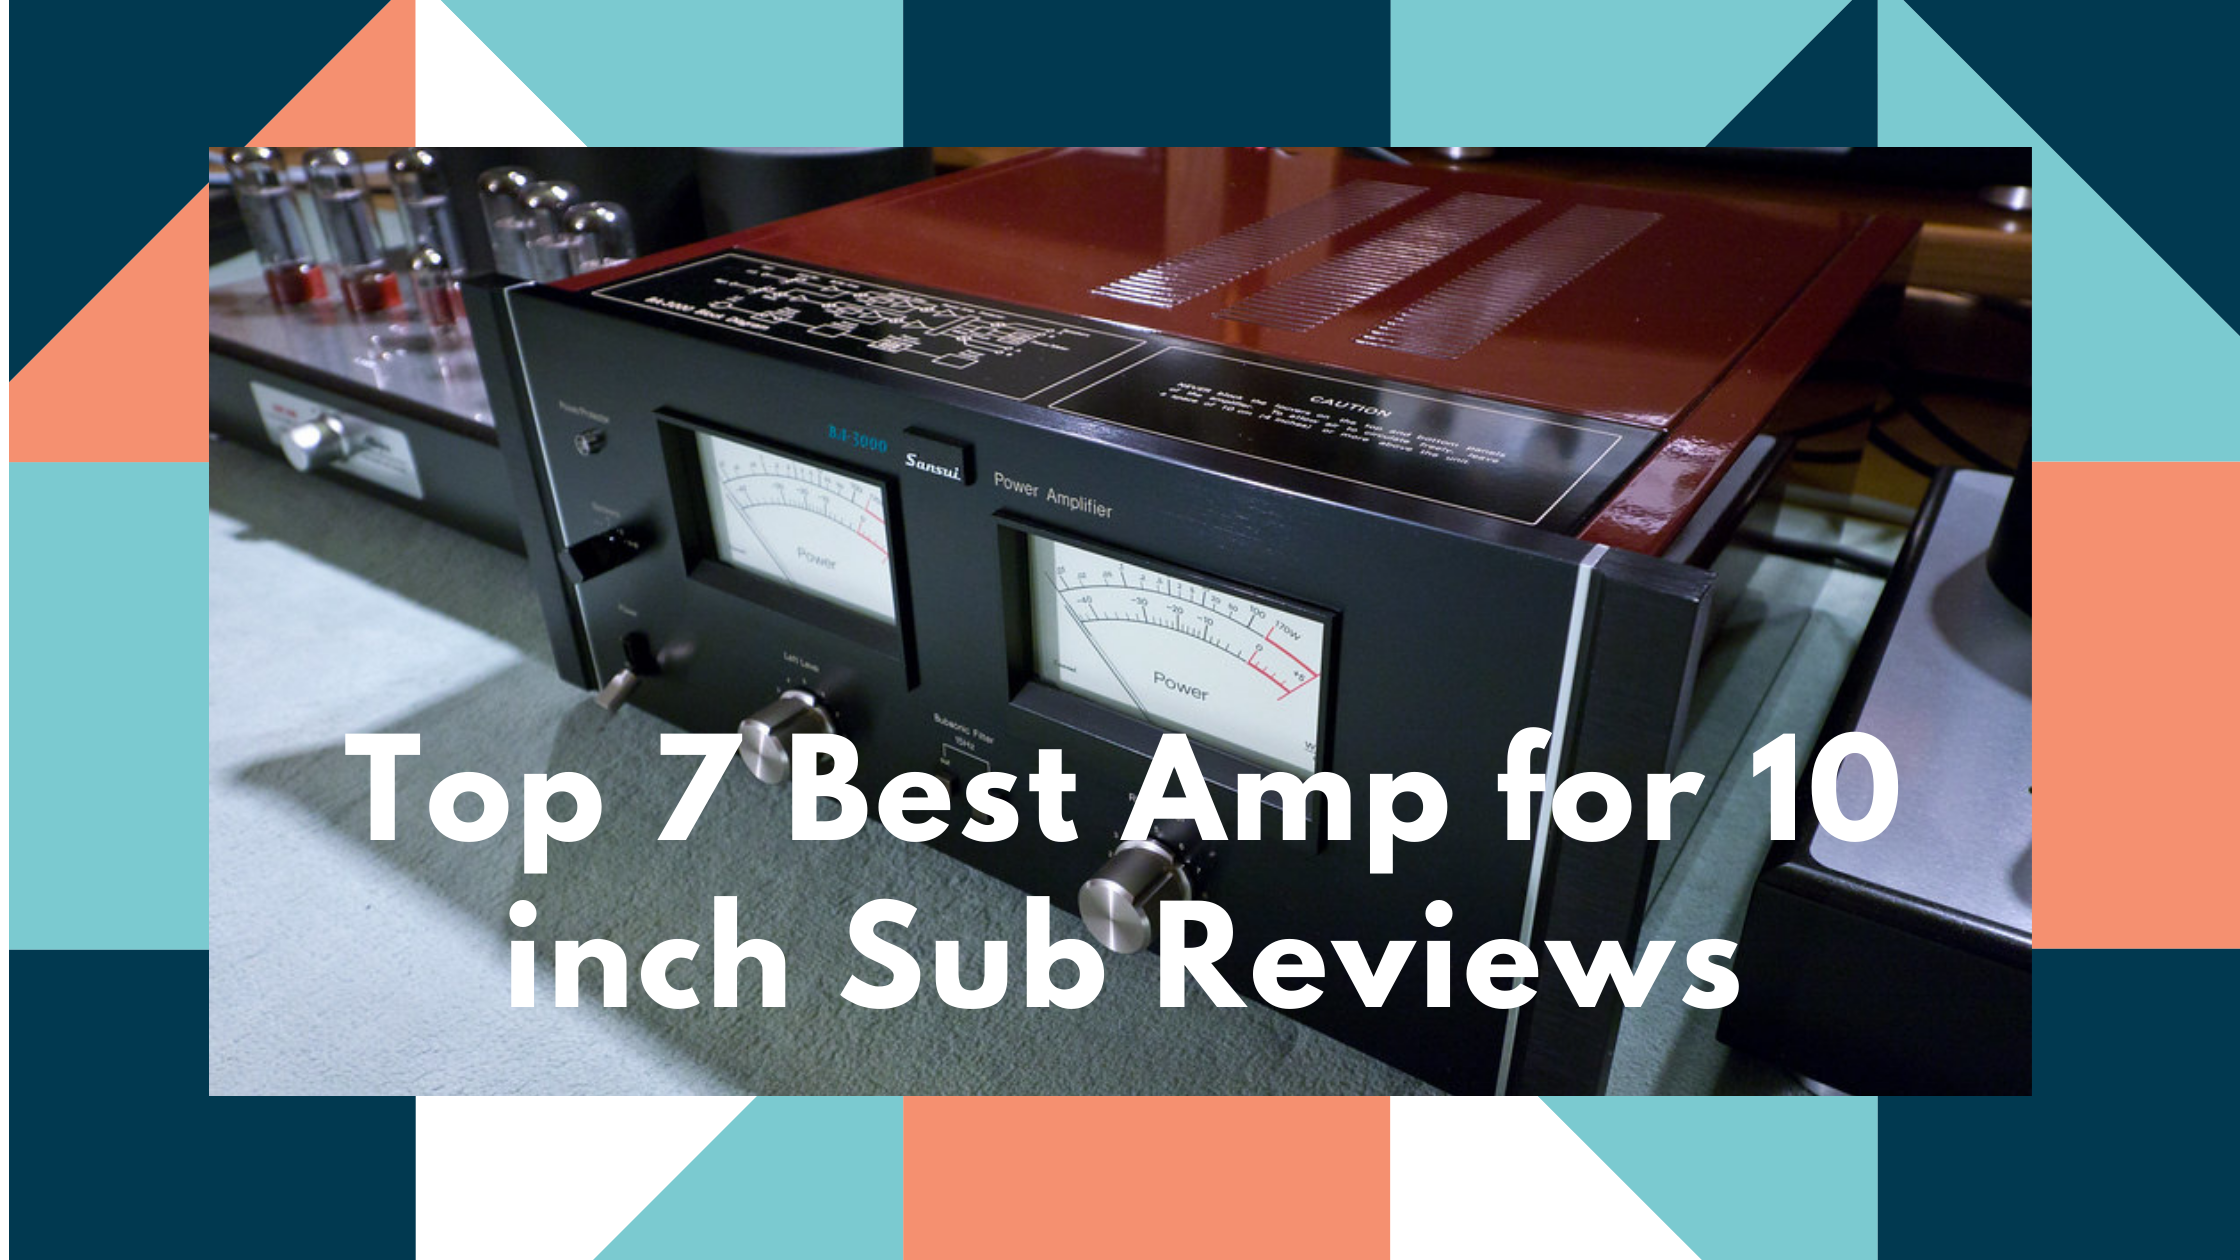 Top-7-Best-amp-for-10-inch-sub-Reviews